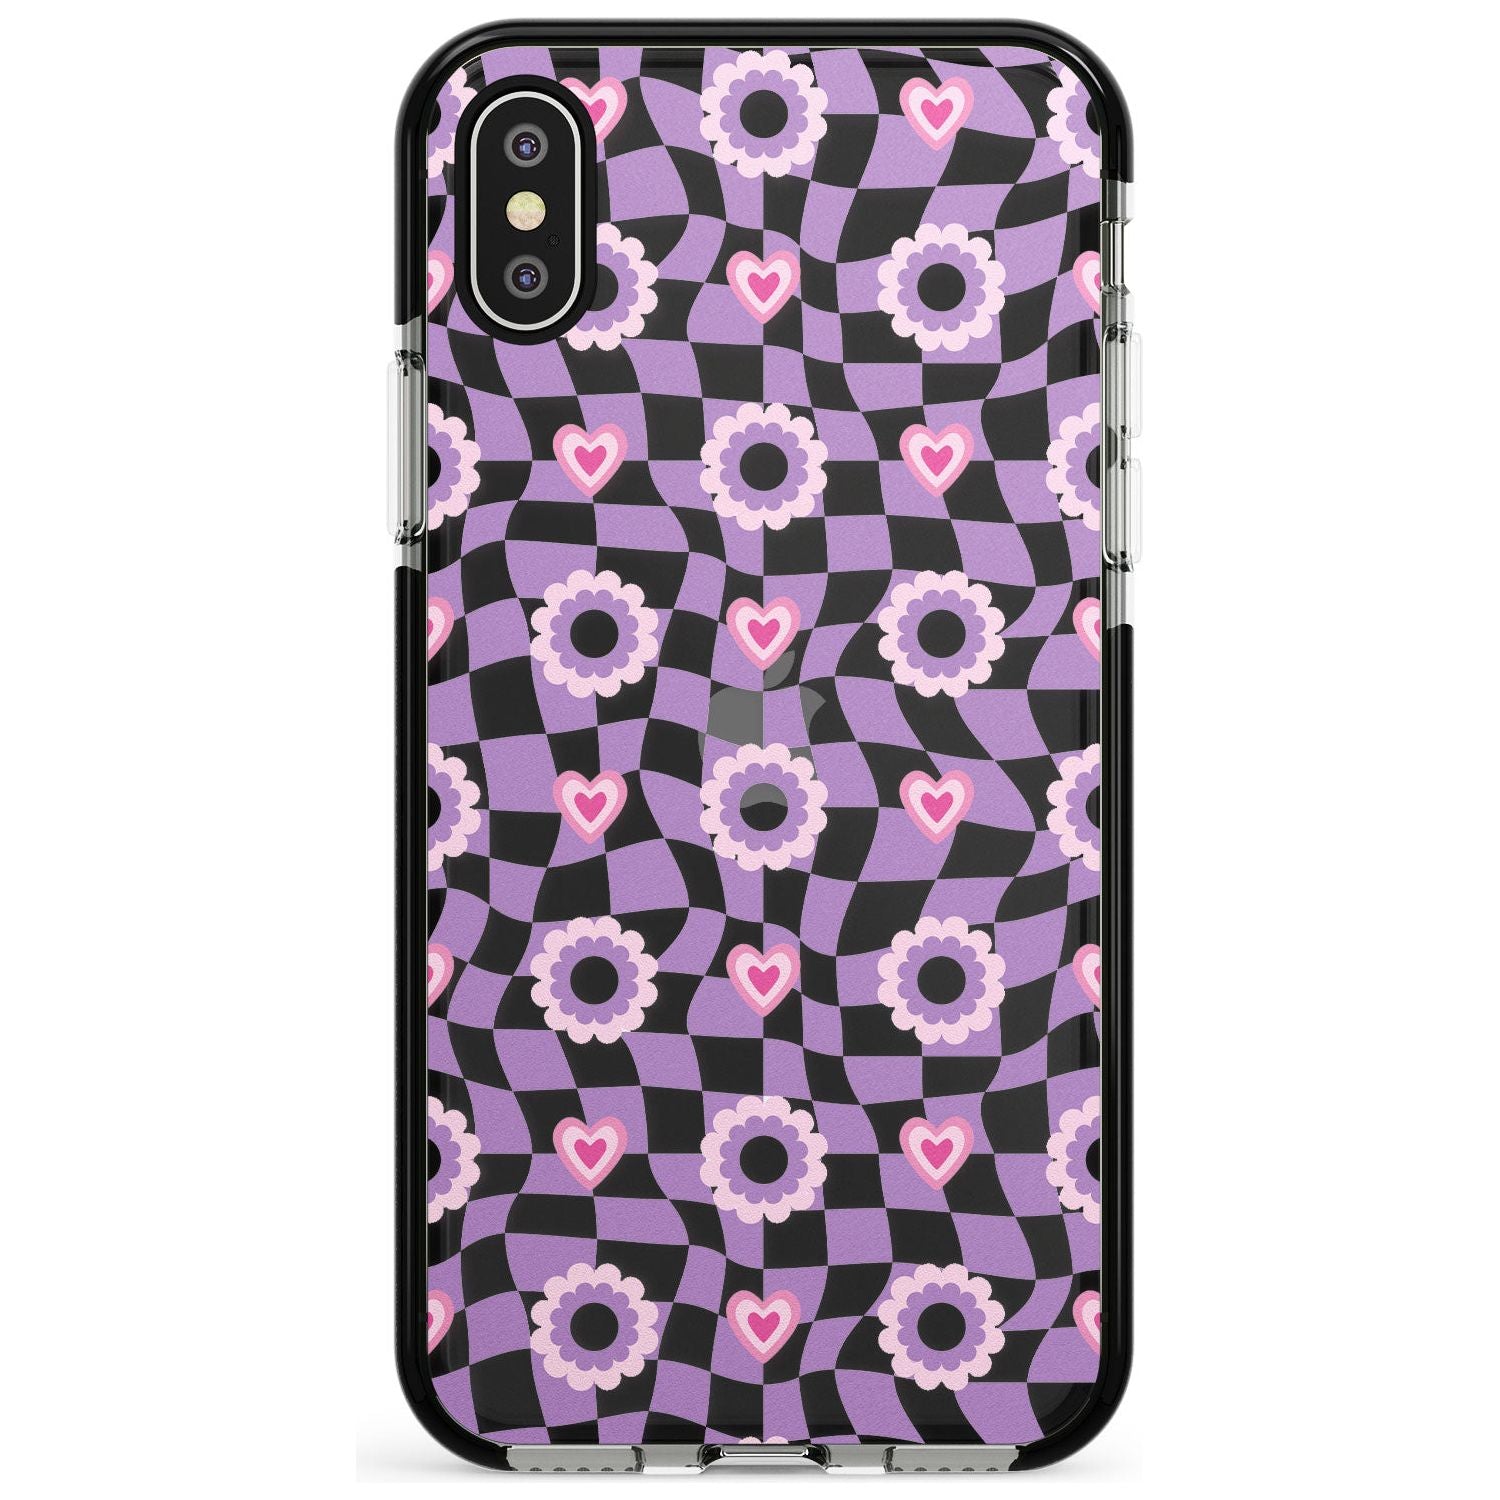 Checkered Love Pattern Black Impact Phone Case for iPhone X XS Max XR